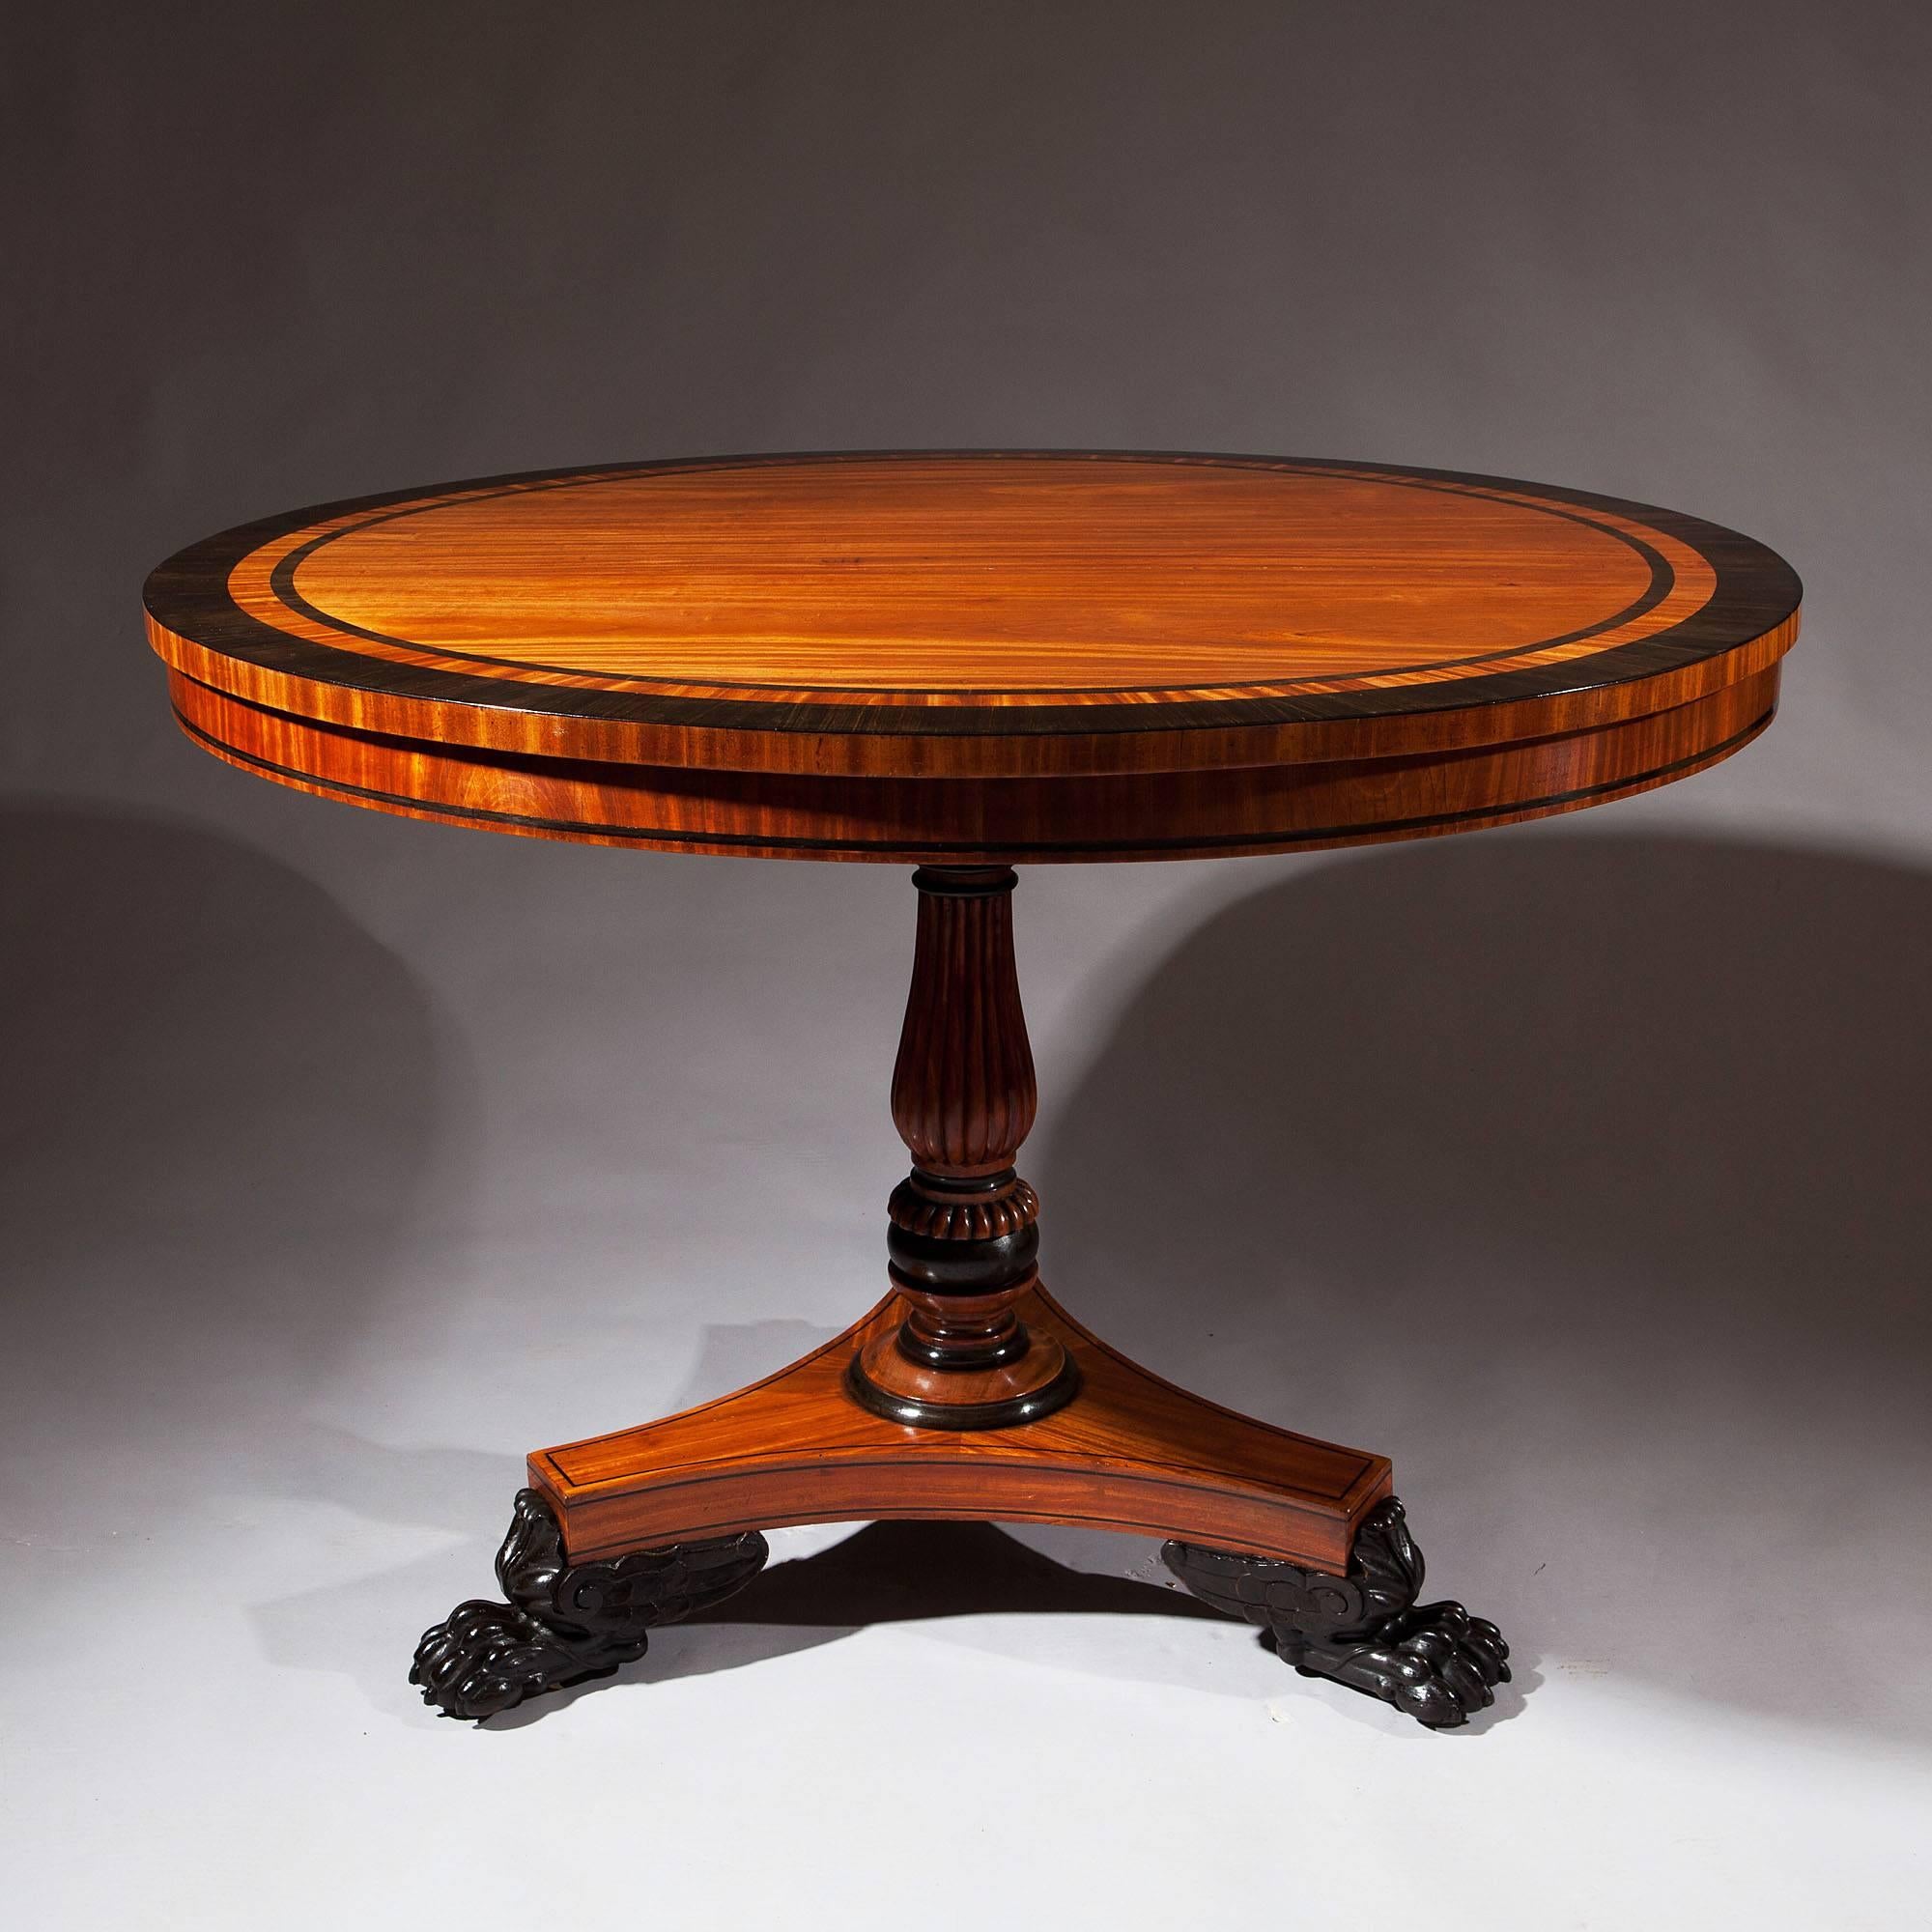 The circular top veneered throughout in exotic timbers of satinwood with ebony banding, supported on a carved and turned column and raised on a triangular base with concave sides, supported on ebonized clawed feet.
      